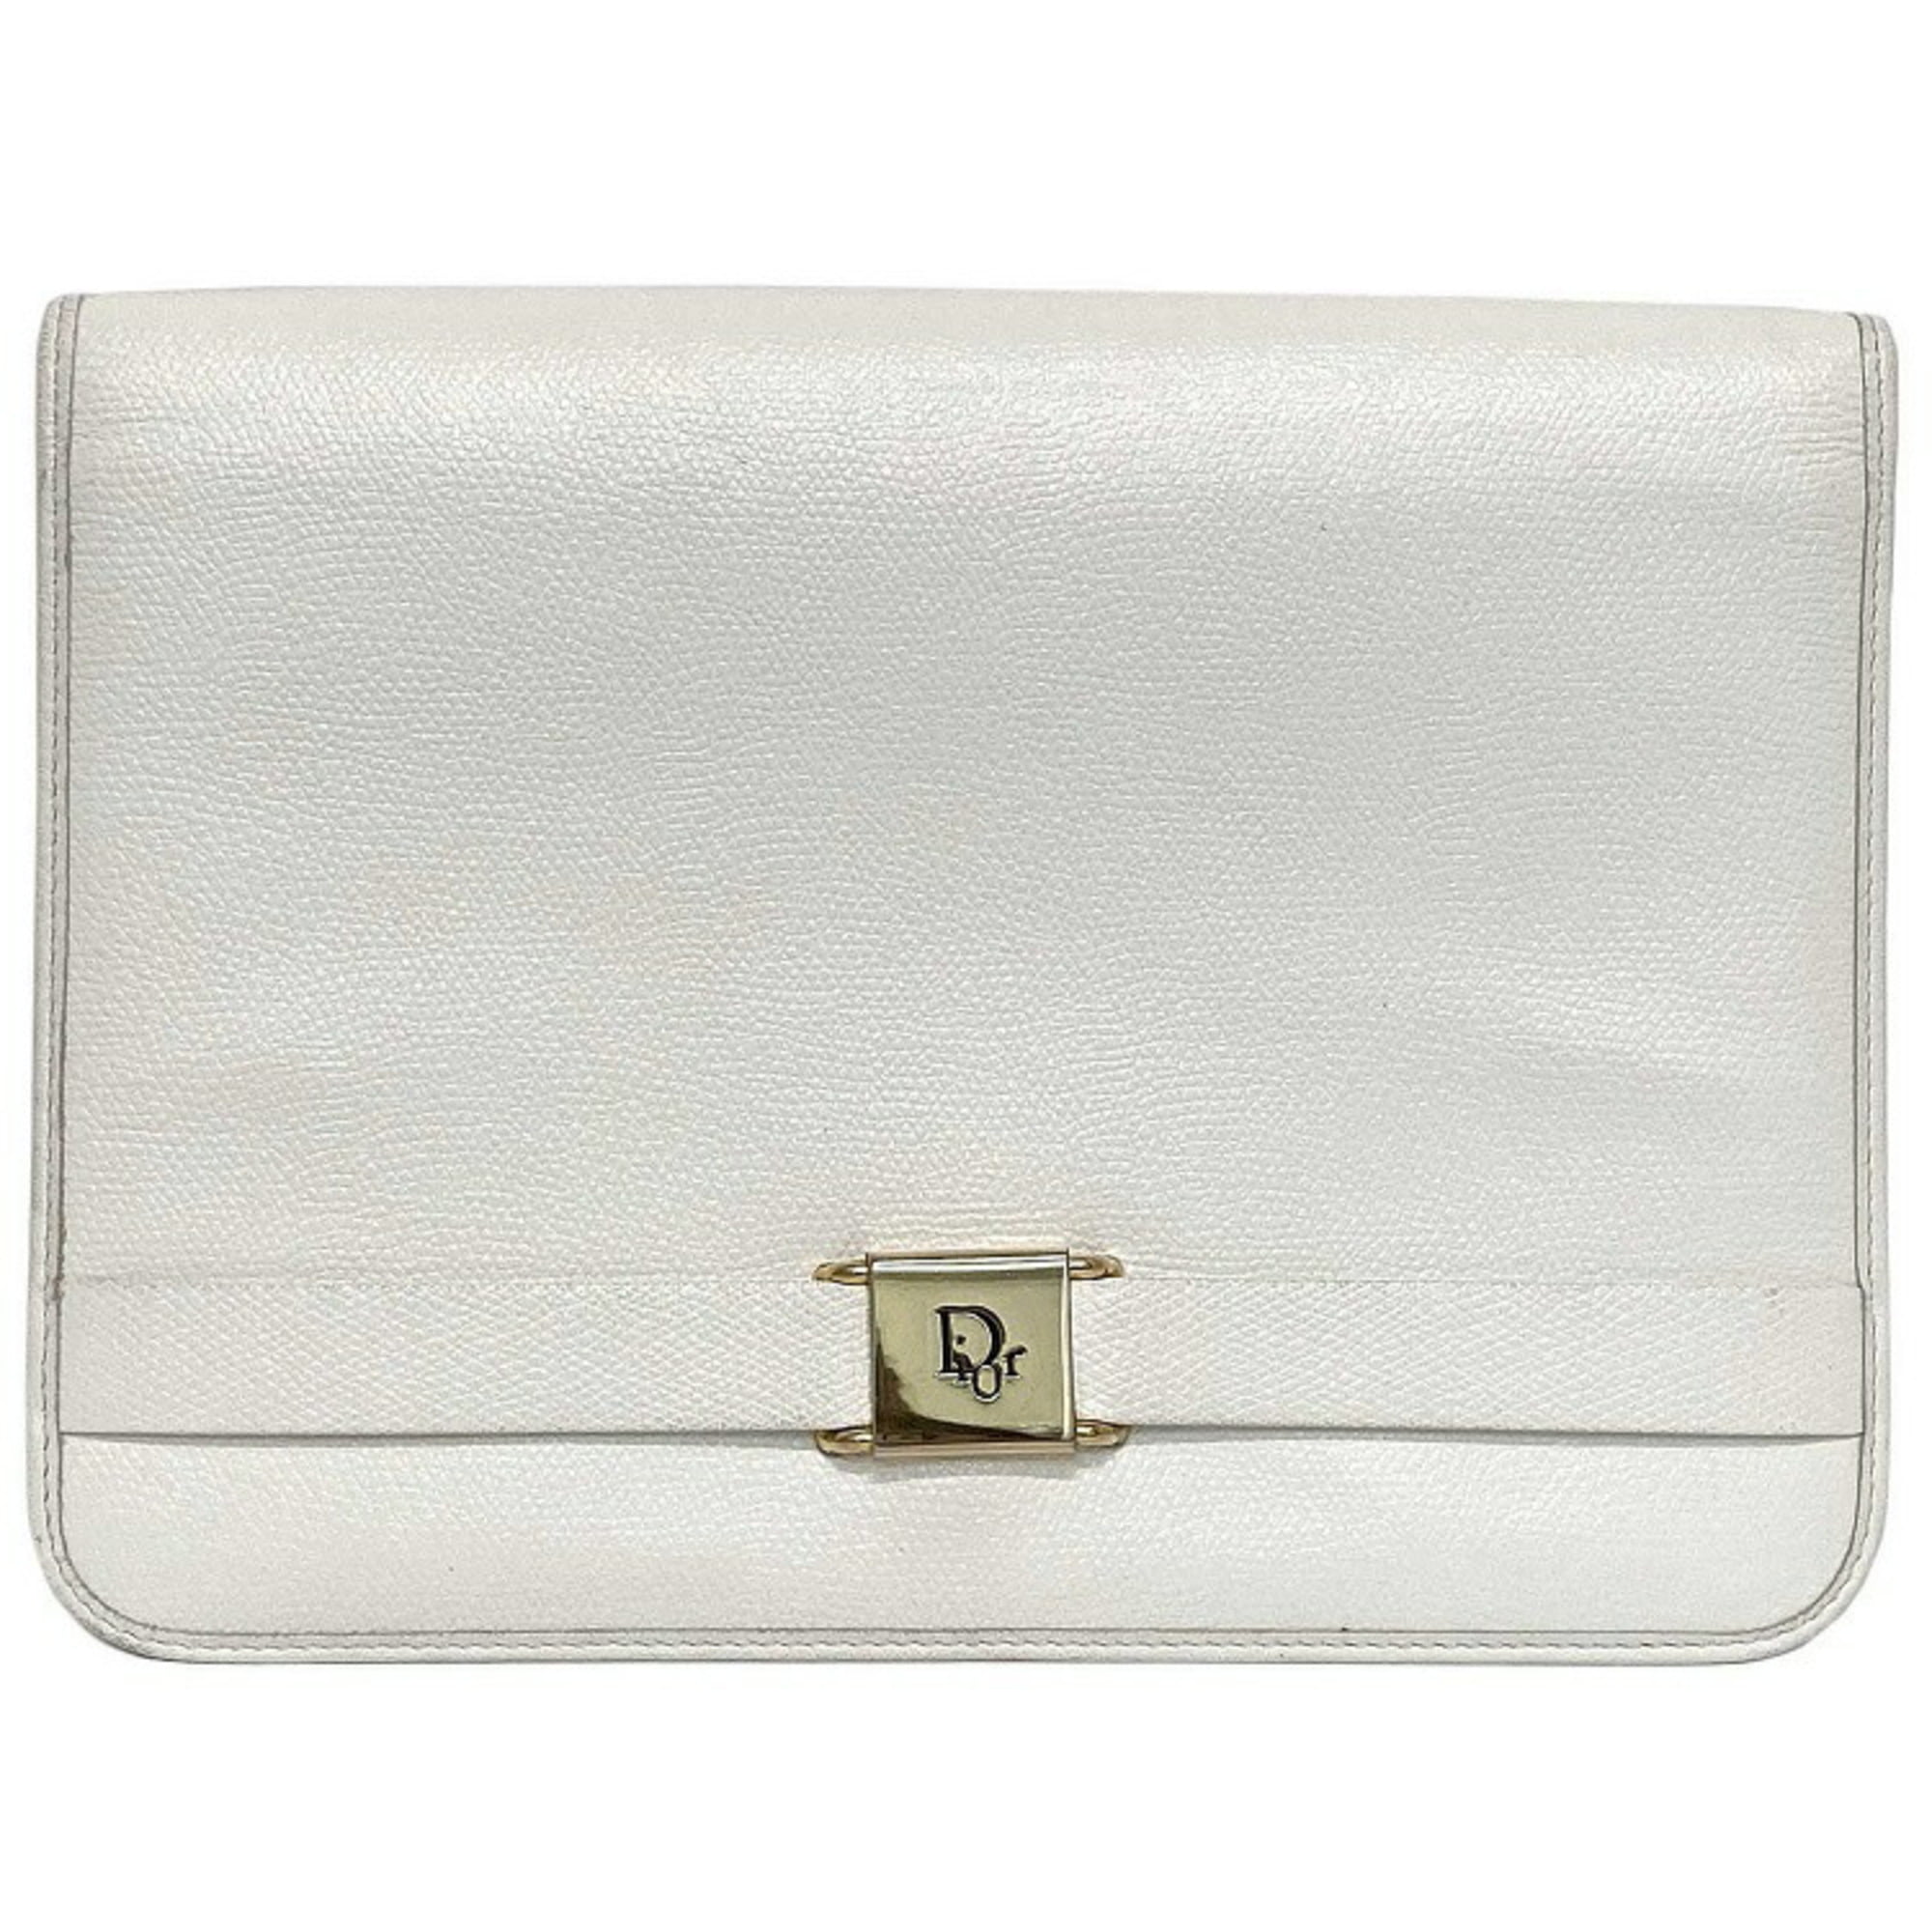 Authenticated used Christian Dior Clutch Bag White Gold Flap Leather Plate Ladies, Adult Unisex, Size: (HxWxD): 17.5cm x 24cm x 2.5cm / 6.88'' x 9.44